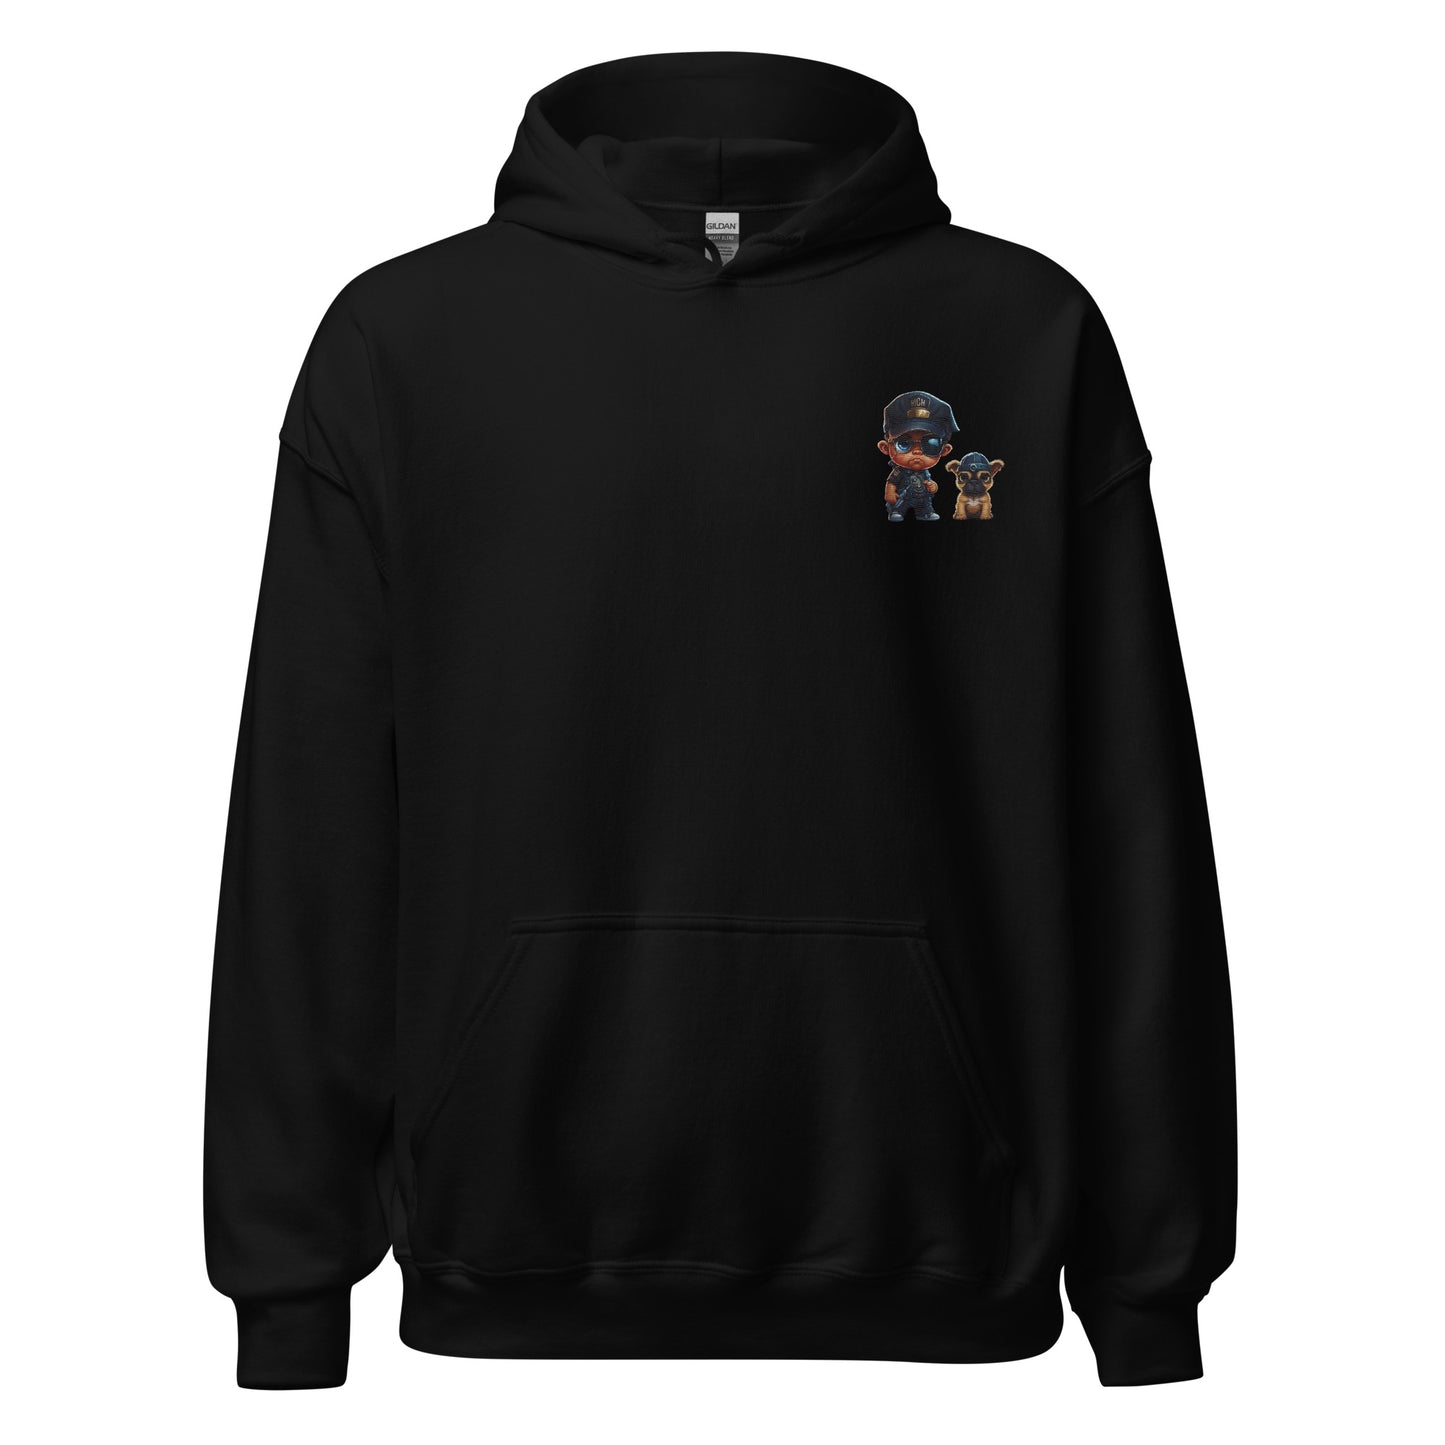 Tiny Enforcer & Paws Unisex Hoodie